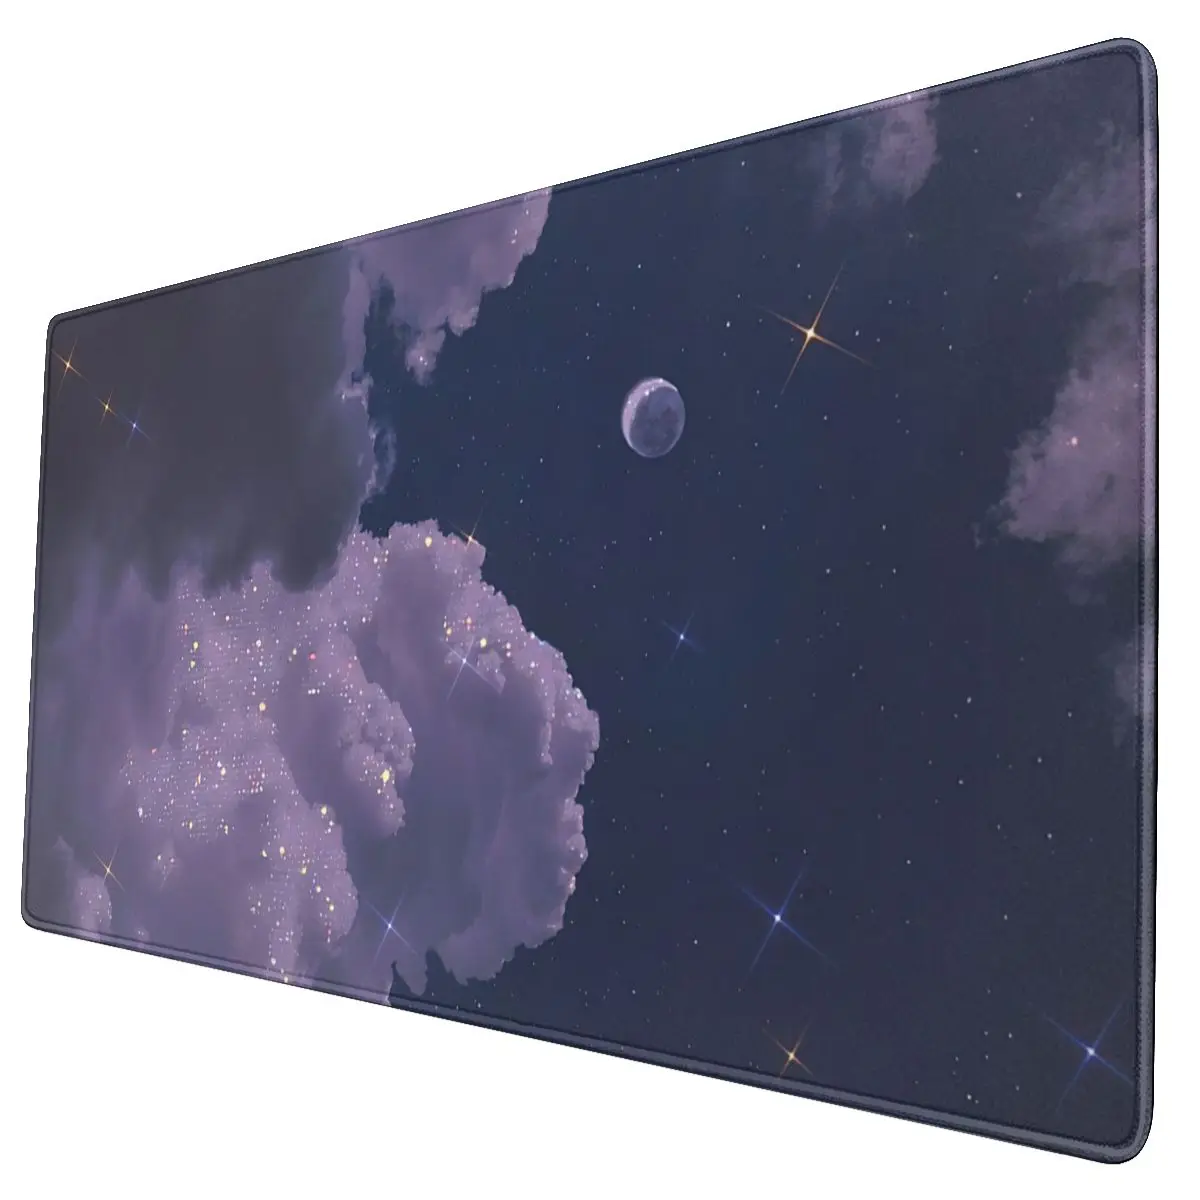 

Blue Sky Moon And Colored Clouds Laptop Mouse Pad Keyboard Table Mat Beautiful Scenery XXL Fabric Mousepad for Gamers